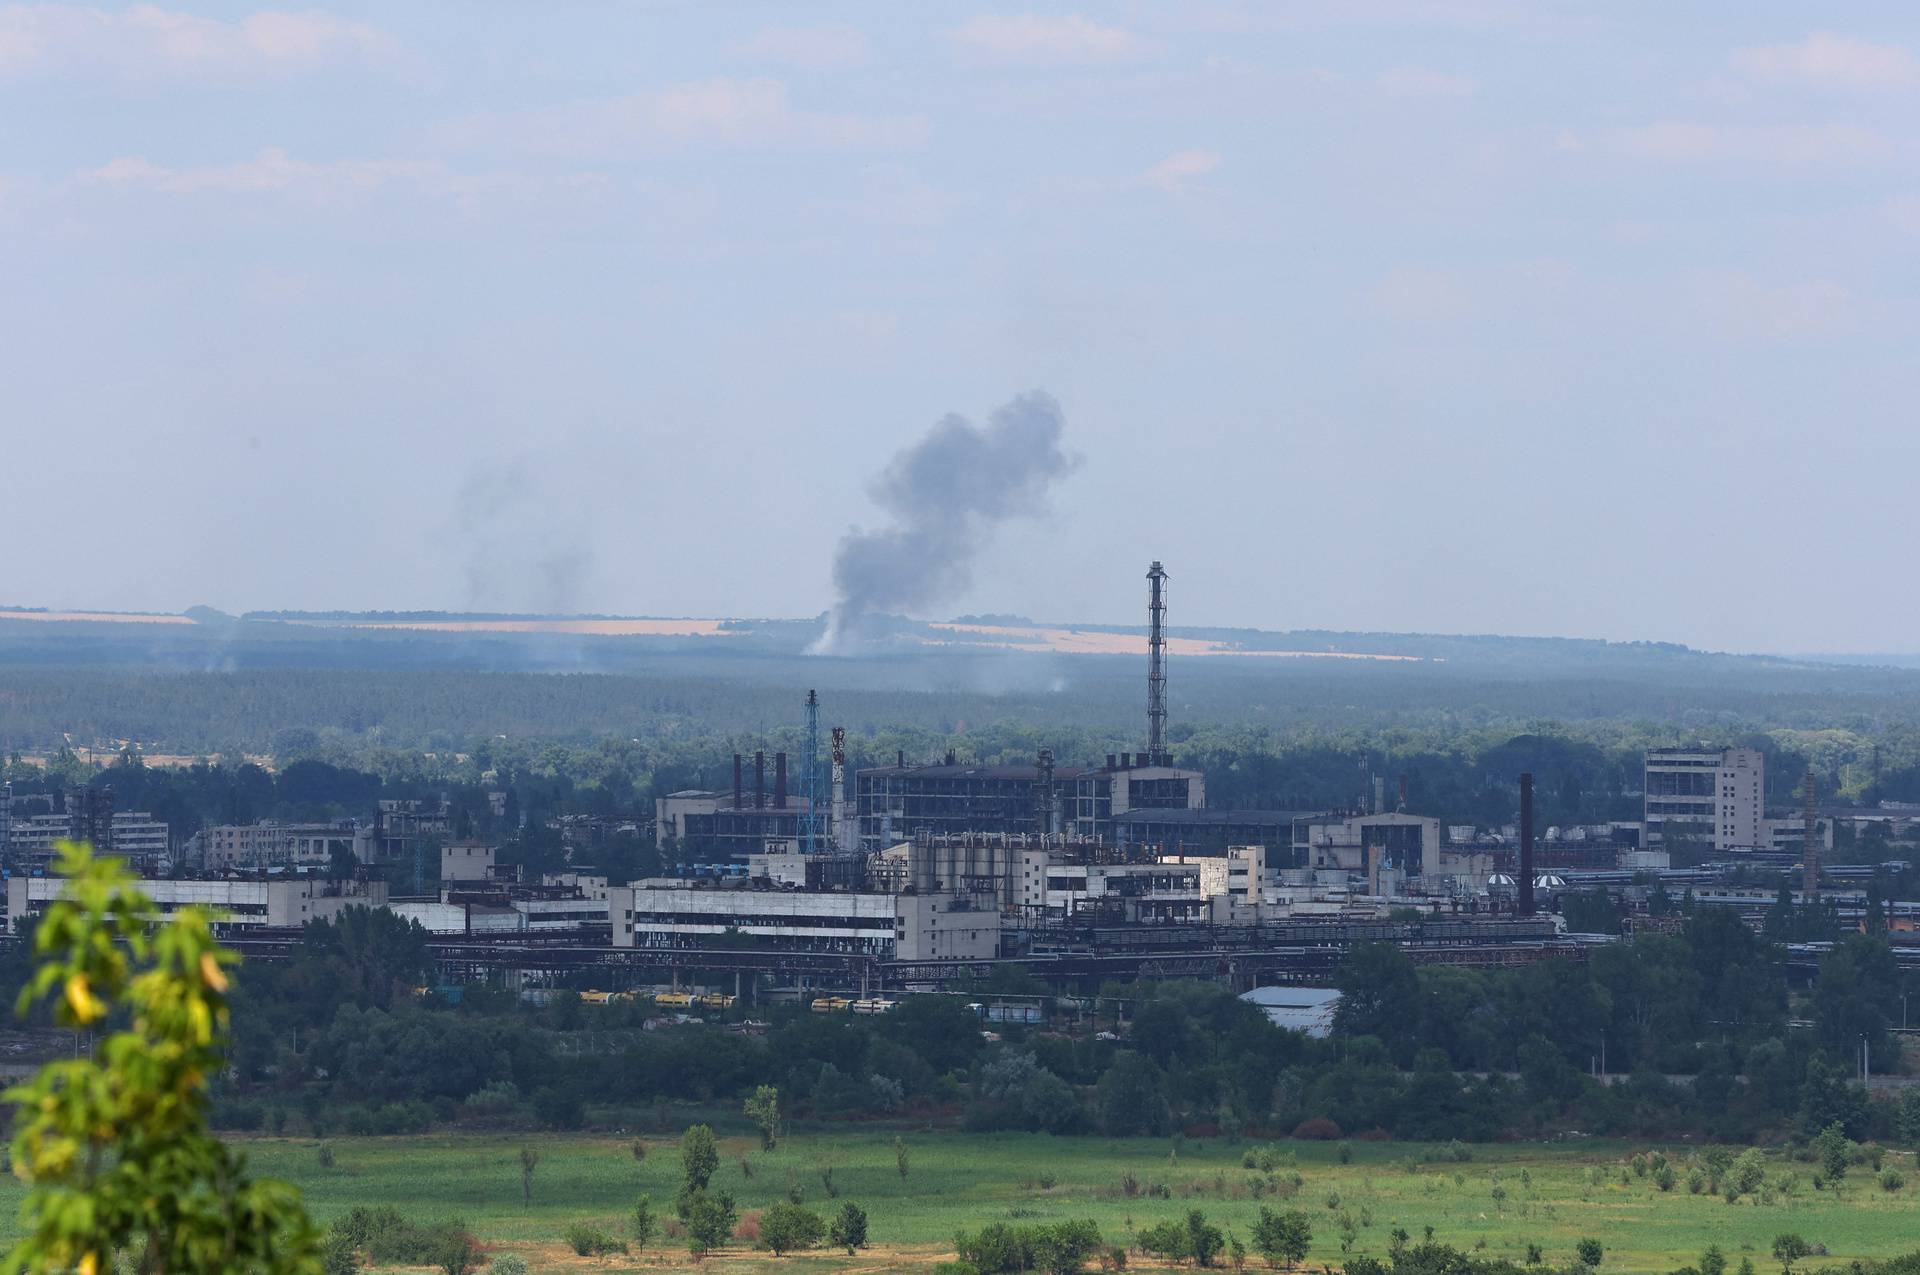 A view shows the Azot chemical plant in Sievierodonetsk from Lysychansk